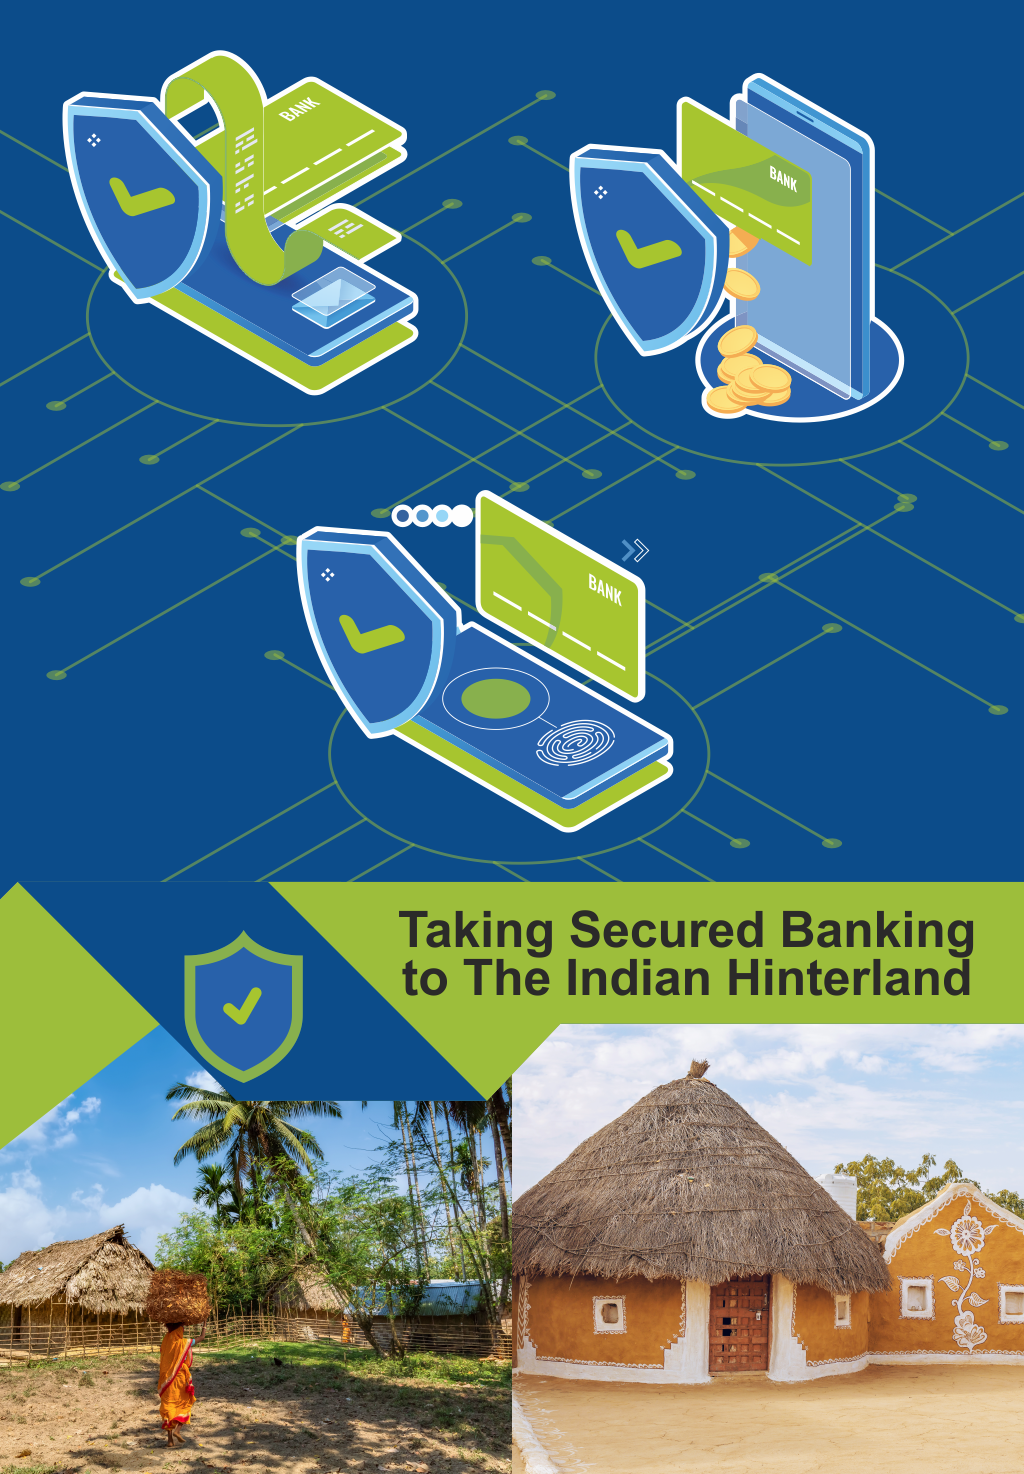 Taking Secured Banking to the Indian Hinterland